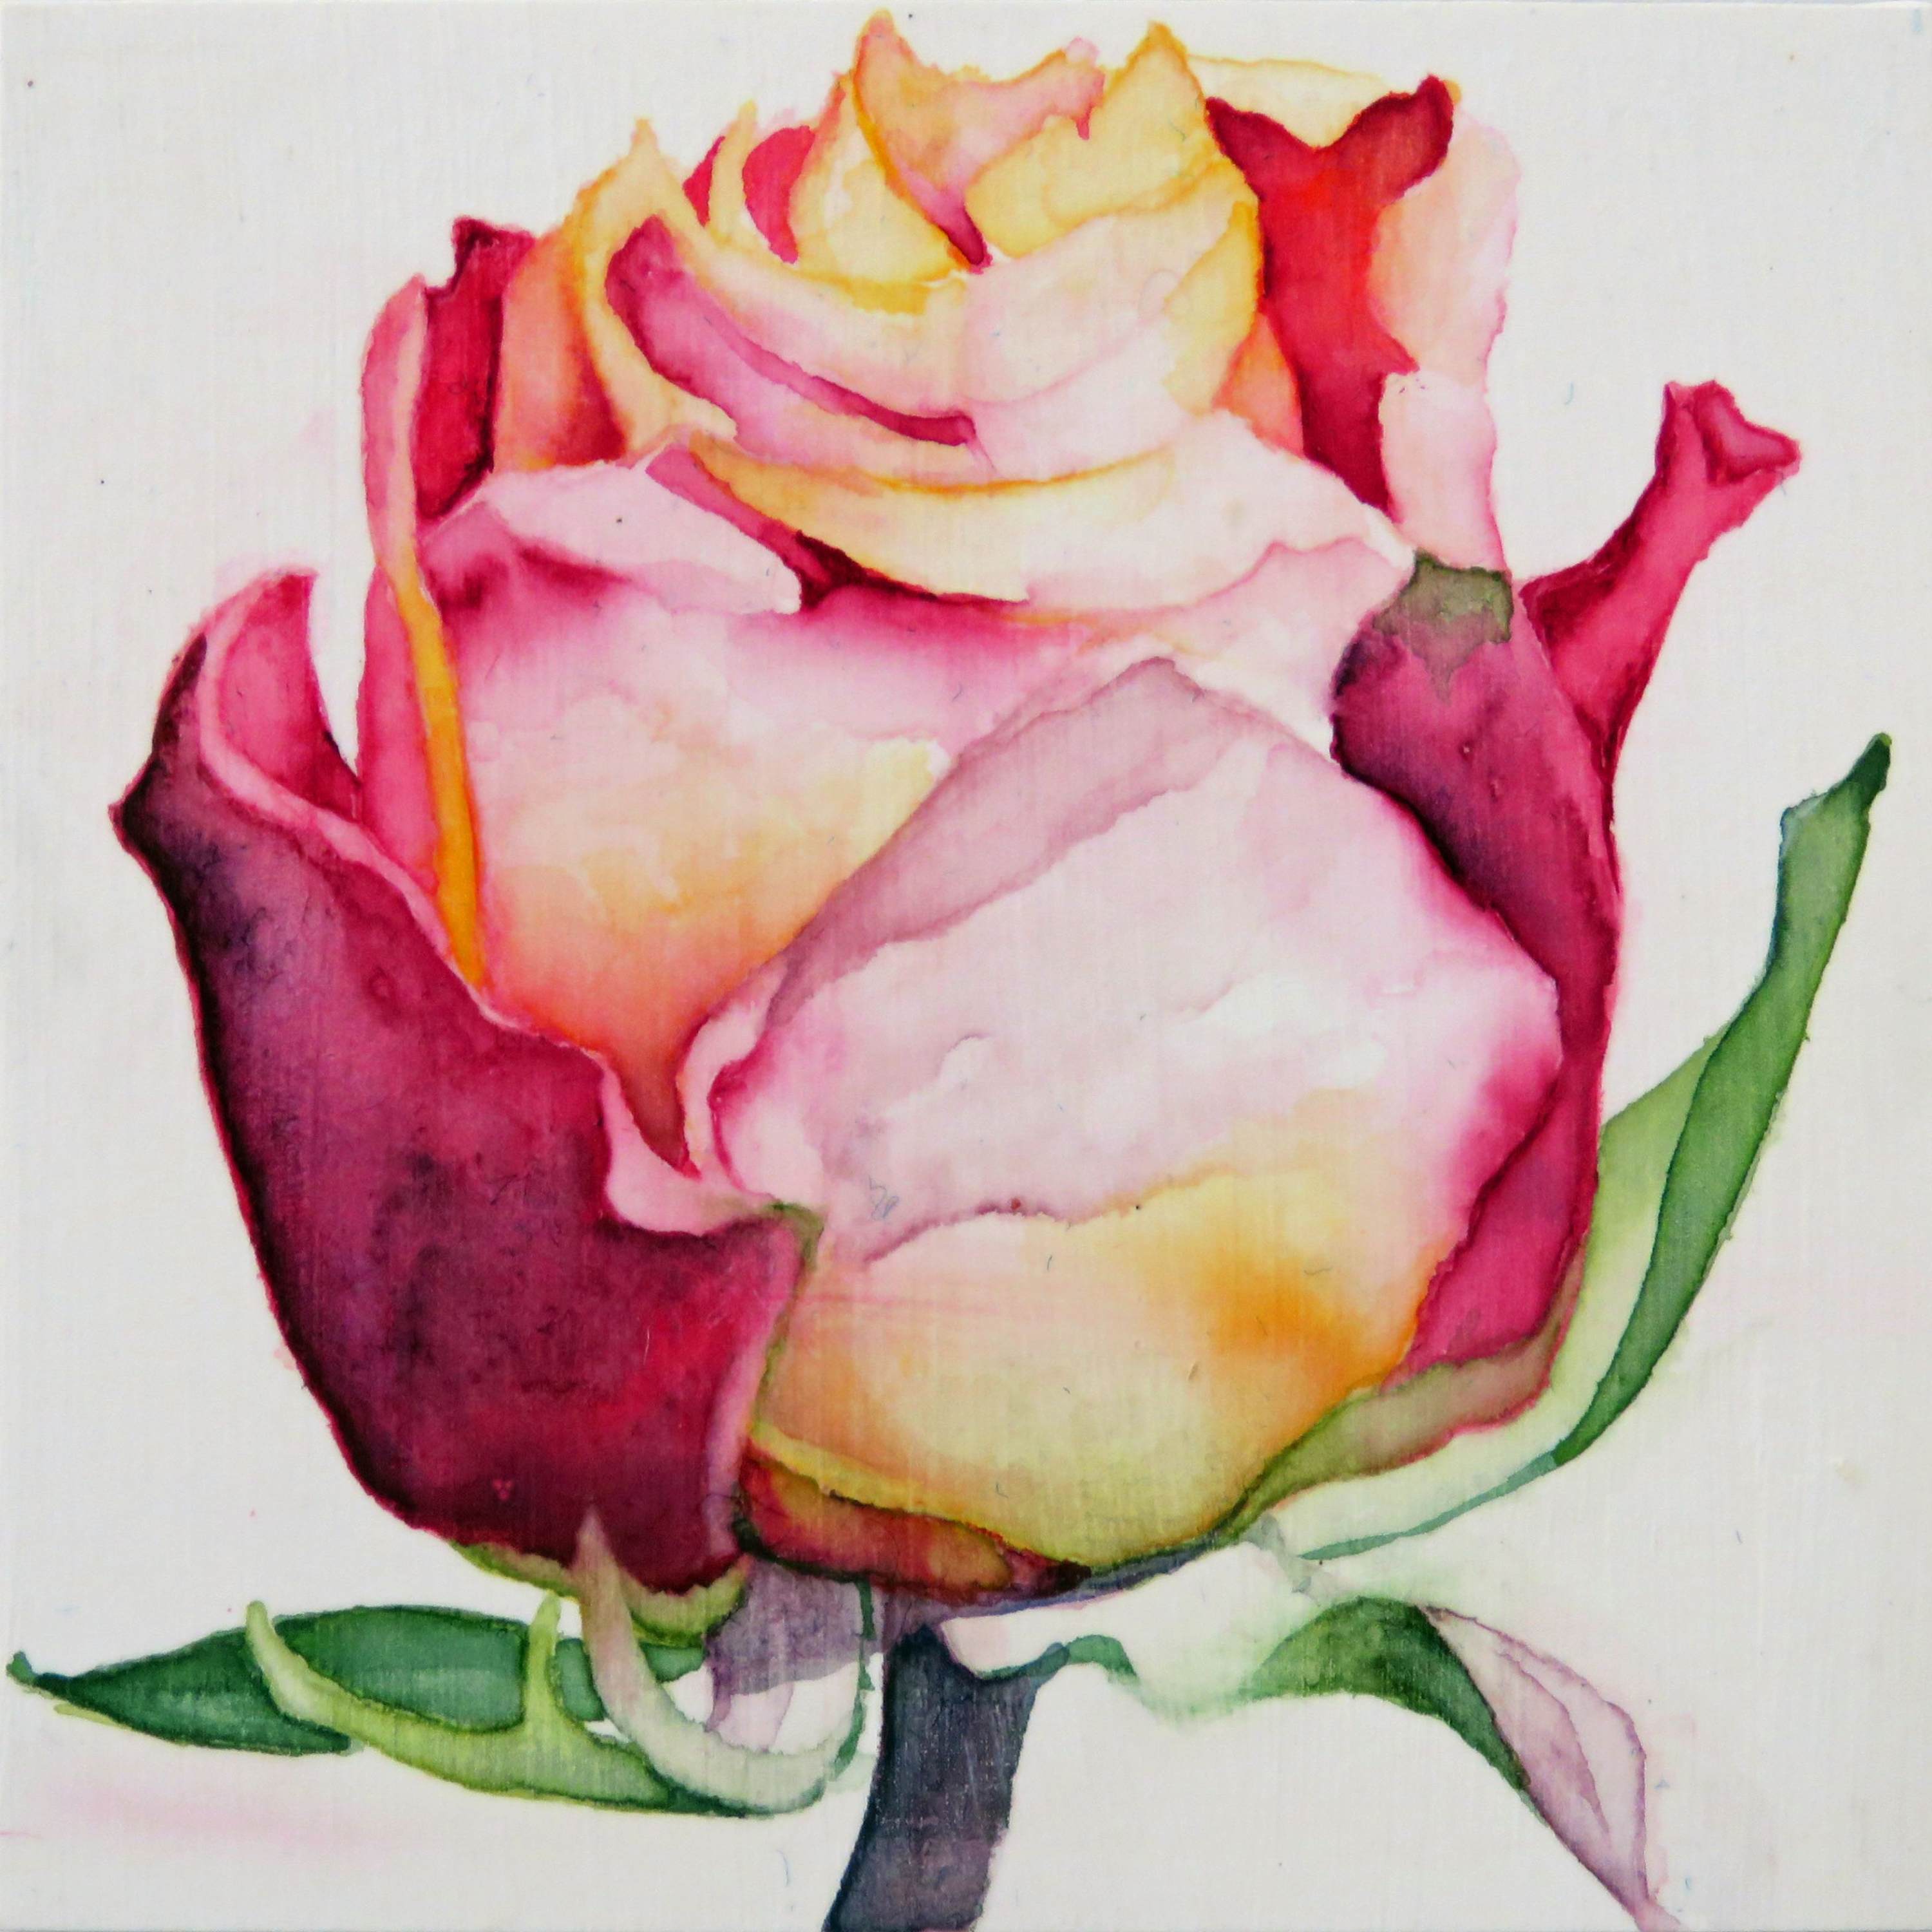 catherine-macaulay-solo-rose-1-watercolor-rose-flower-art-online-gallery